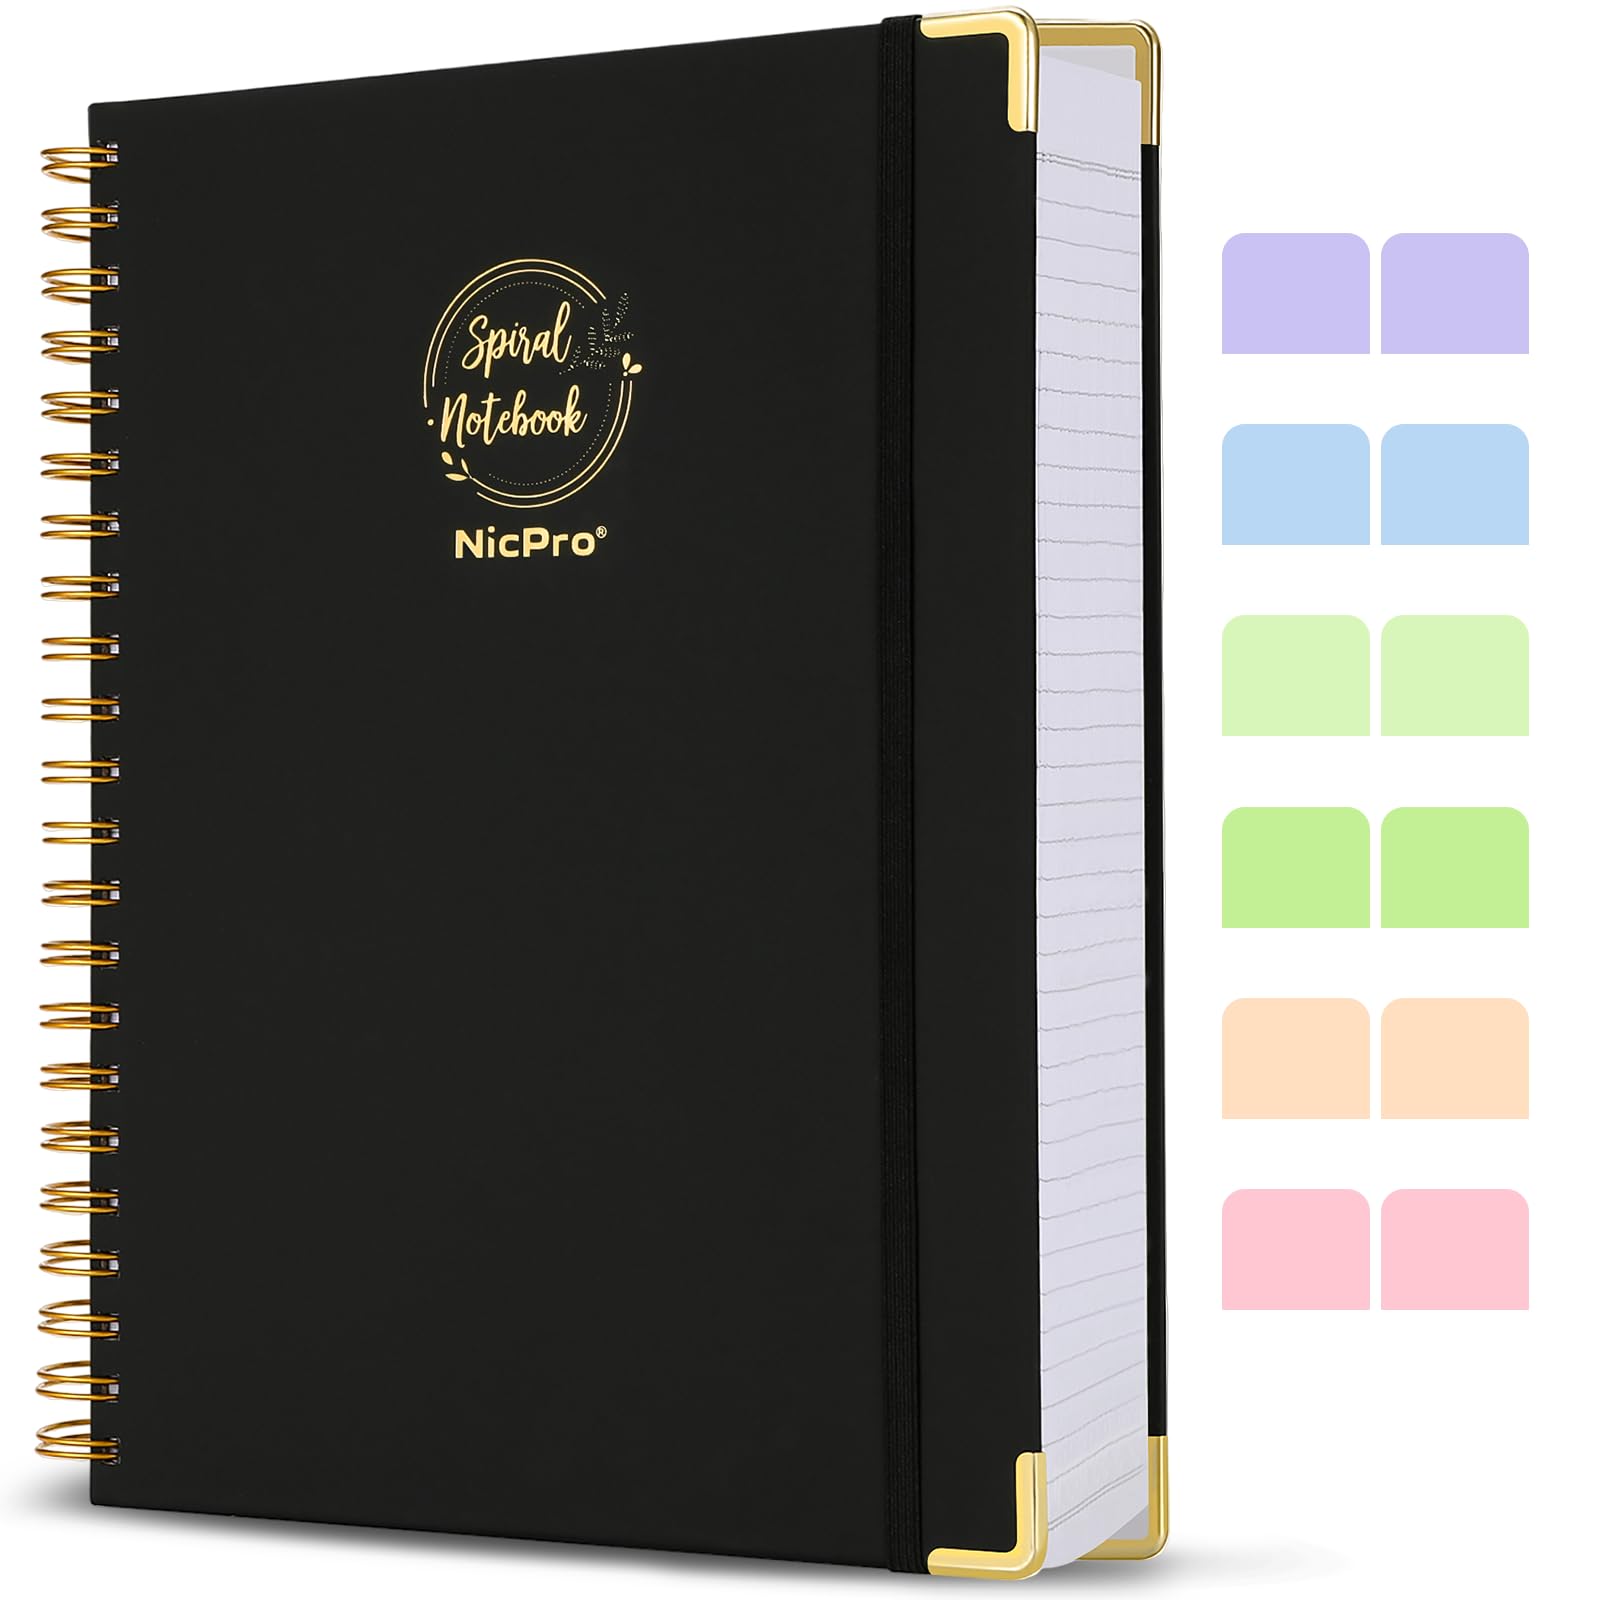 Nicpro 8.5” x 11” Notebook, College Ruled Notebook Journal for Women Men, Black